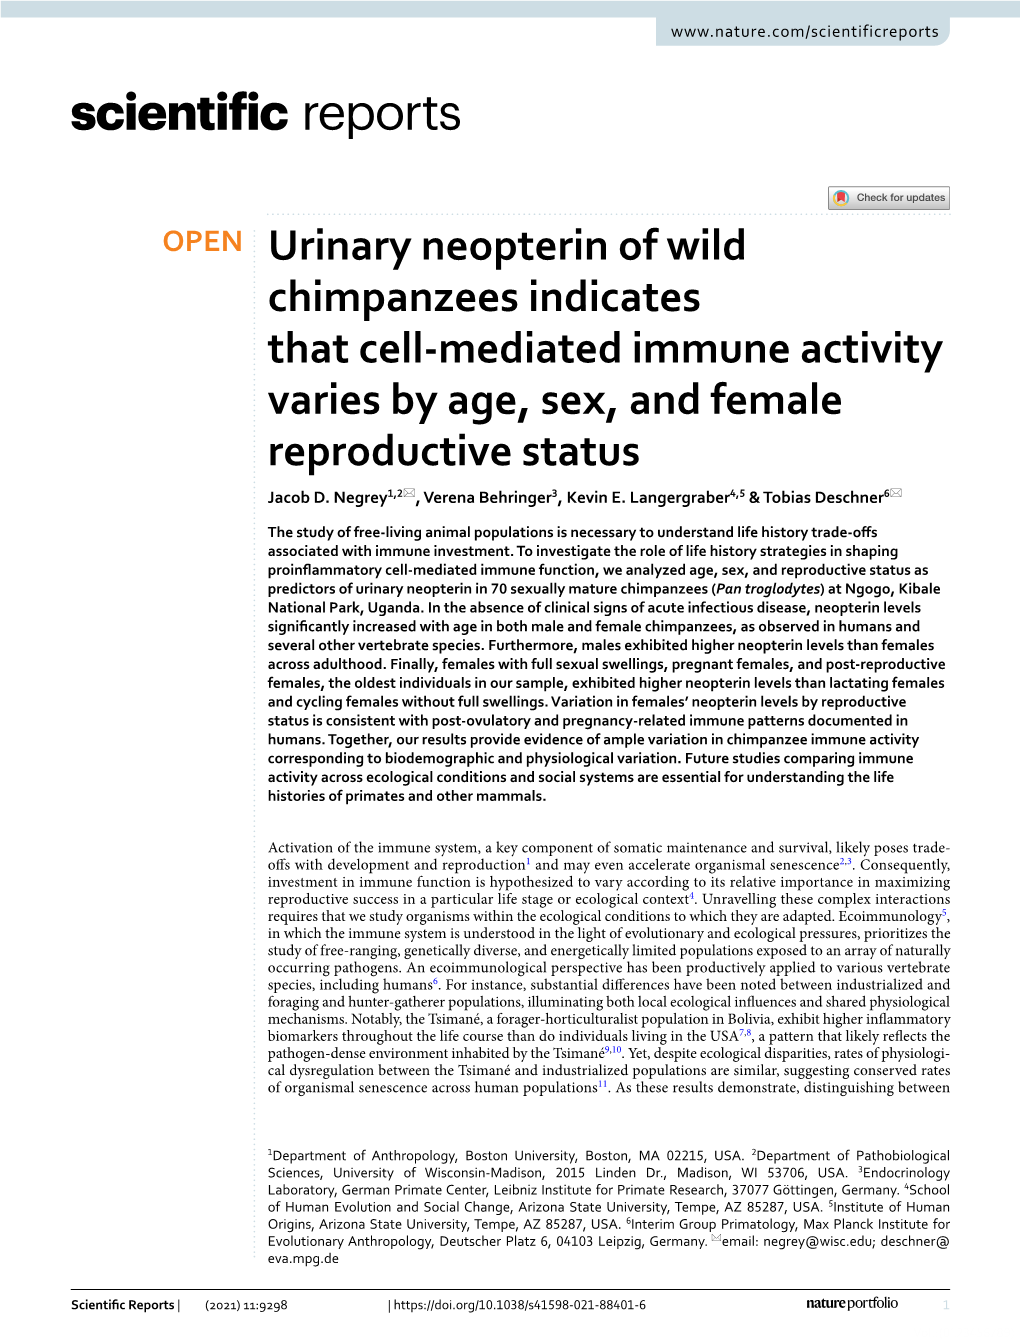 Urinary Neopterin of Wild Chimpanzees Indicates That Cell-Mediated